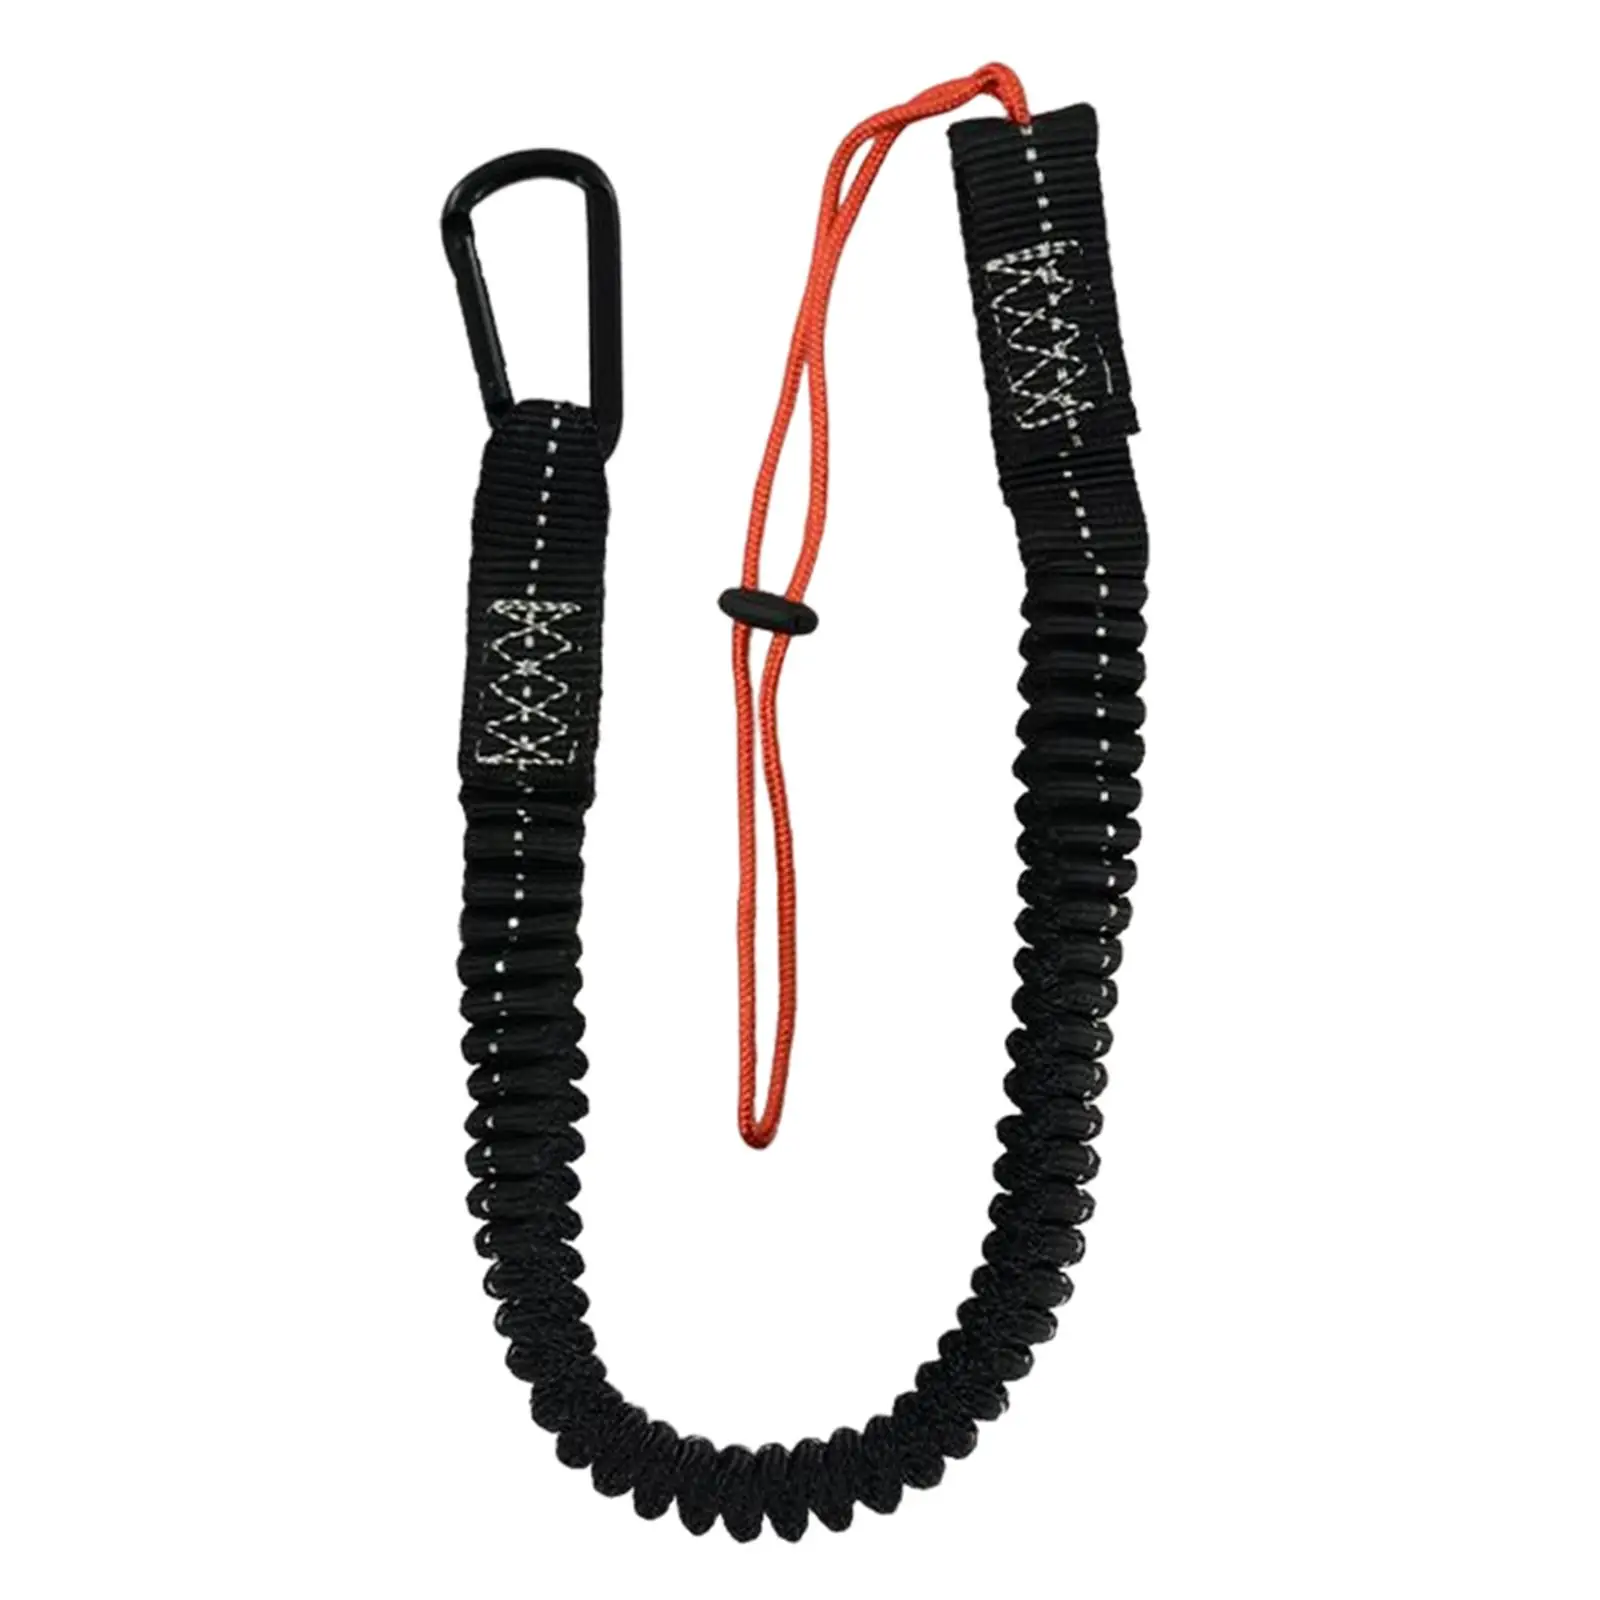 Tool Lanyard Clip Bungee Cord Retractable Shock Cord Stopper for Mountaineering Camping